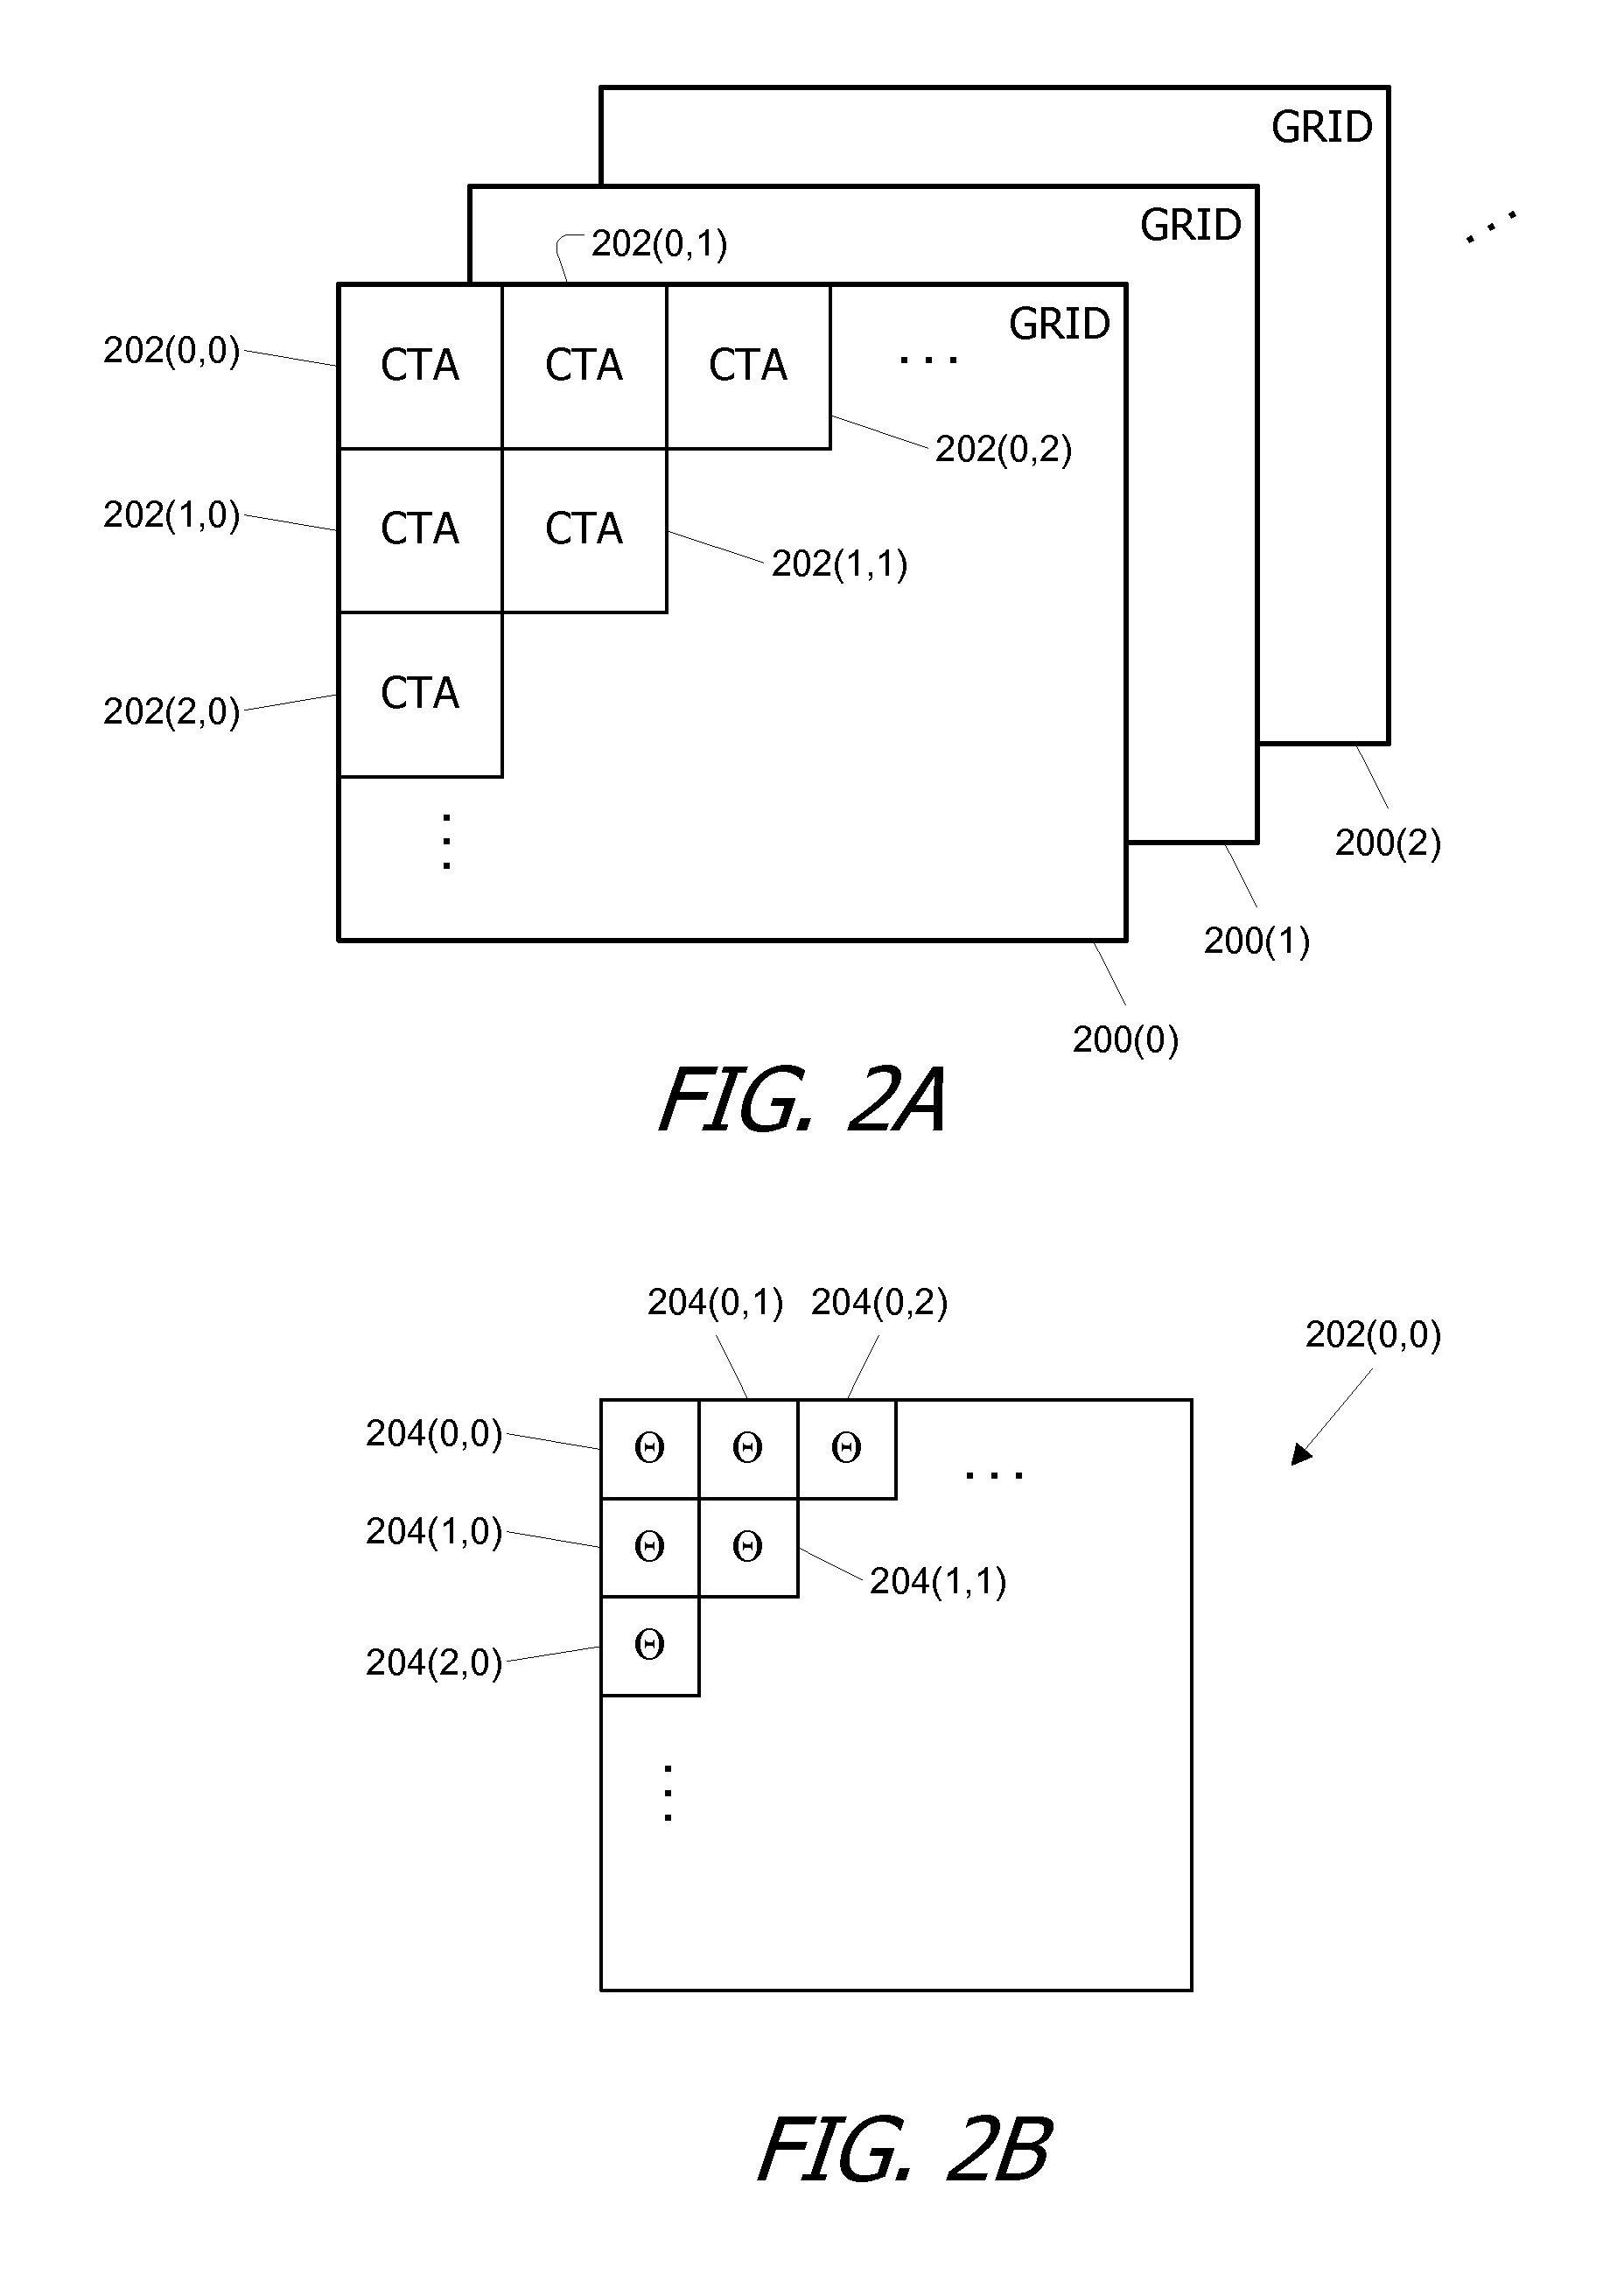 Virtual architecture and instruction set for parallel thread computing